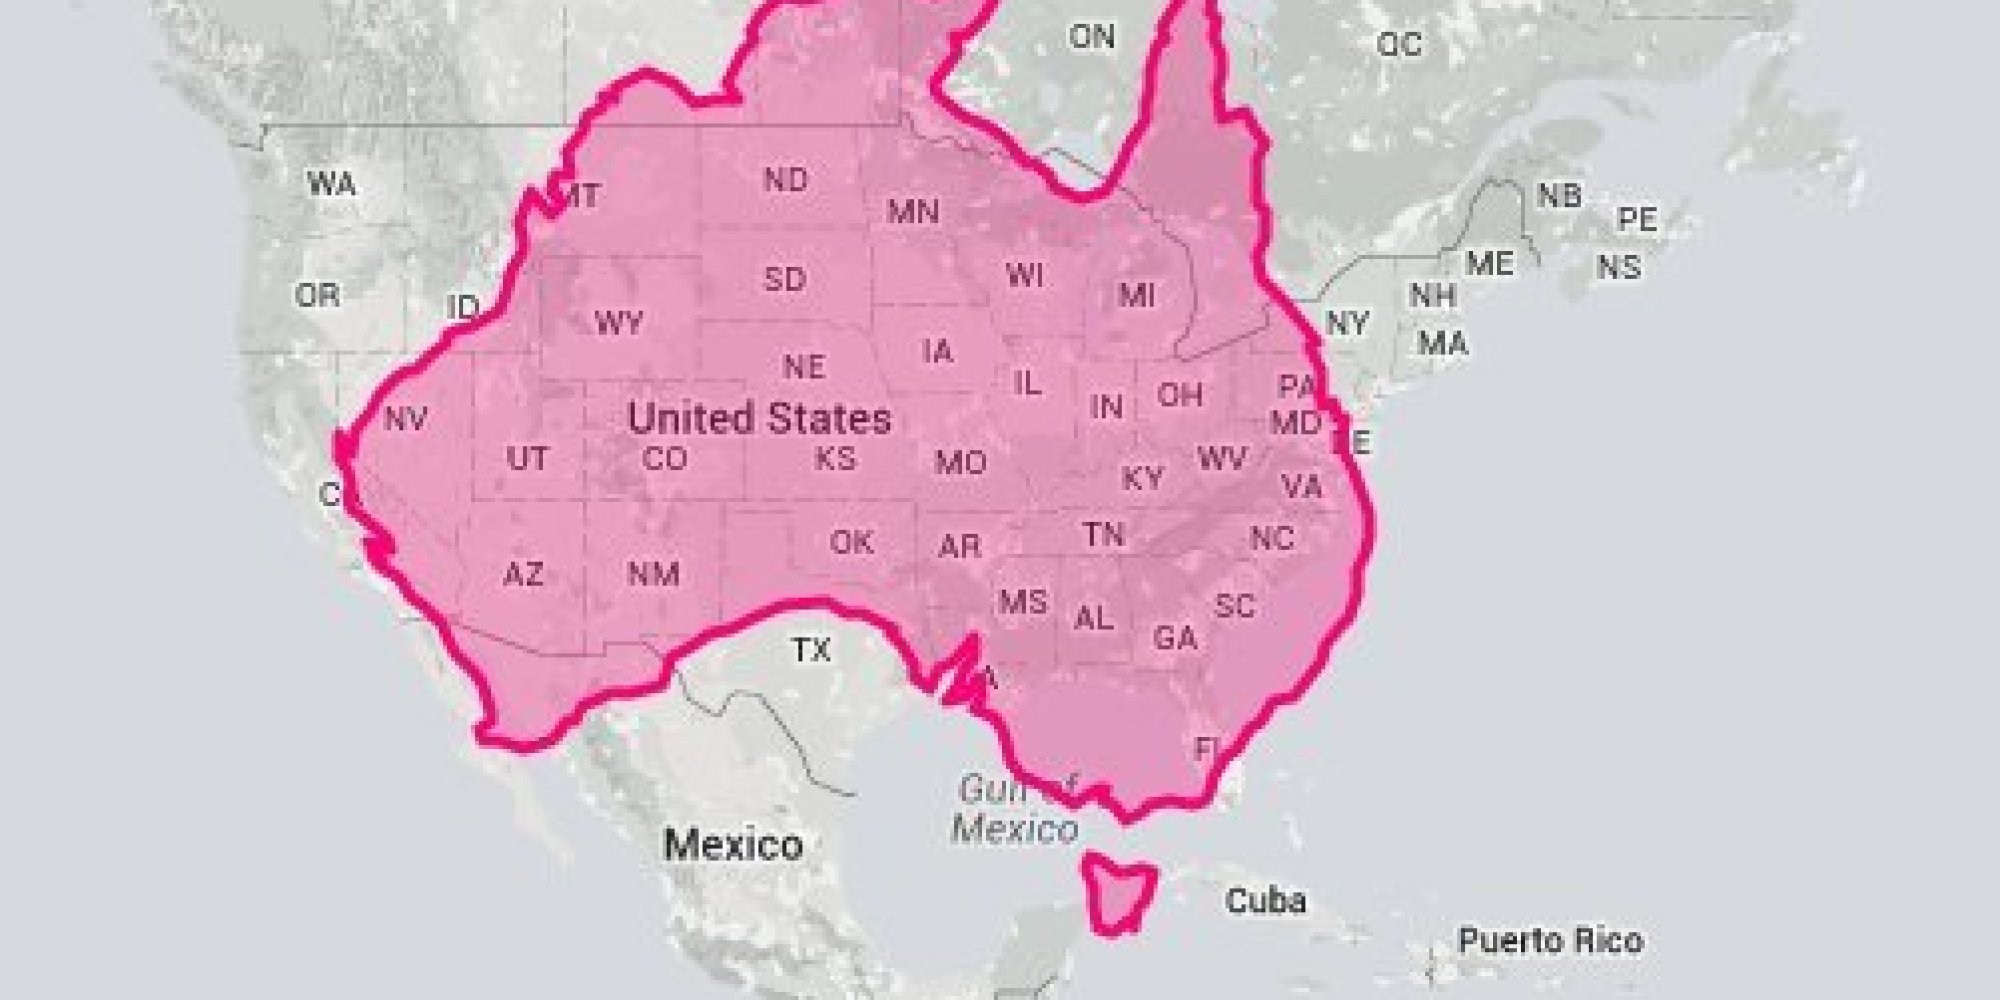 Compare Australia's Size To Other Countries